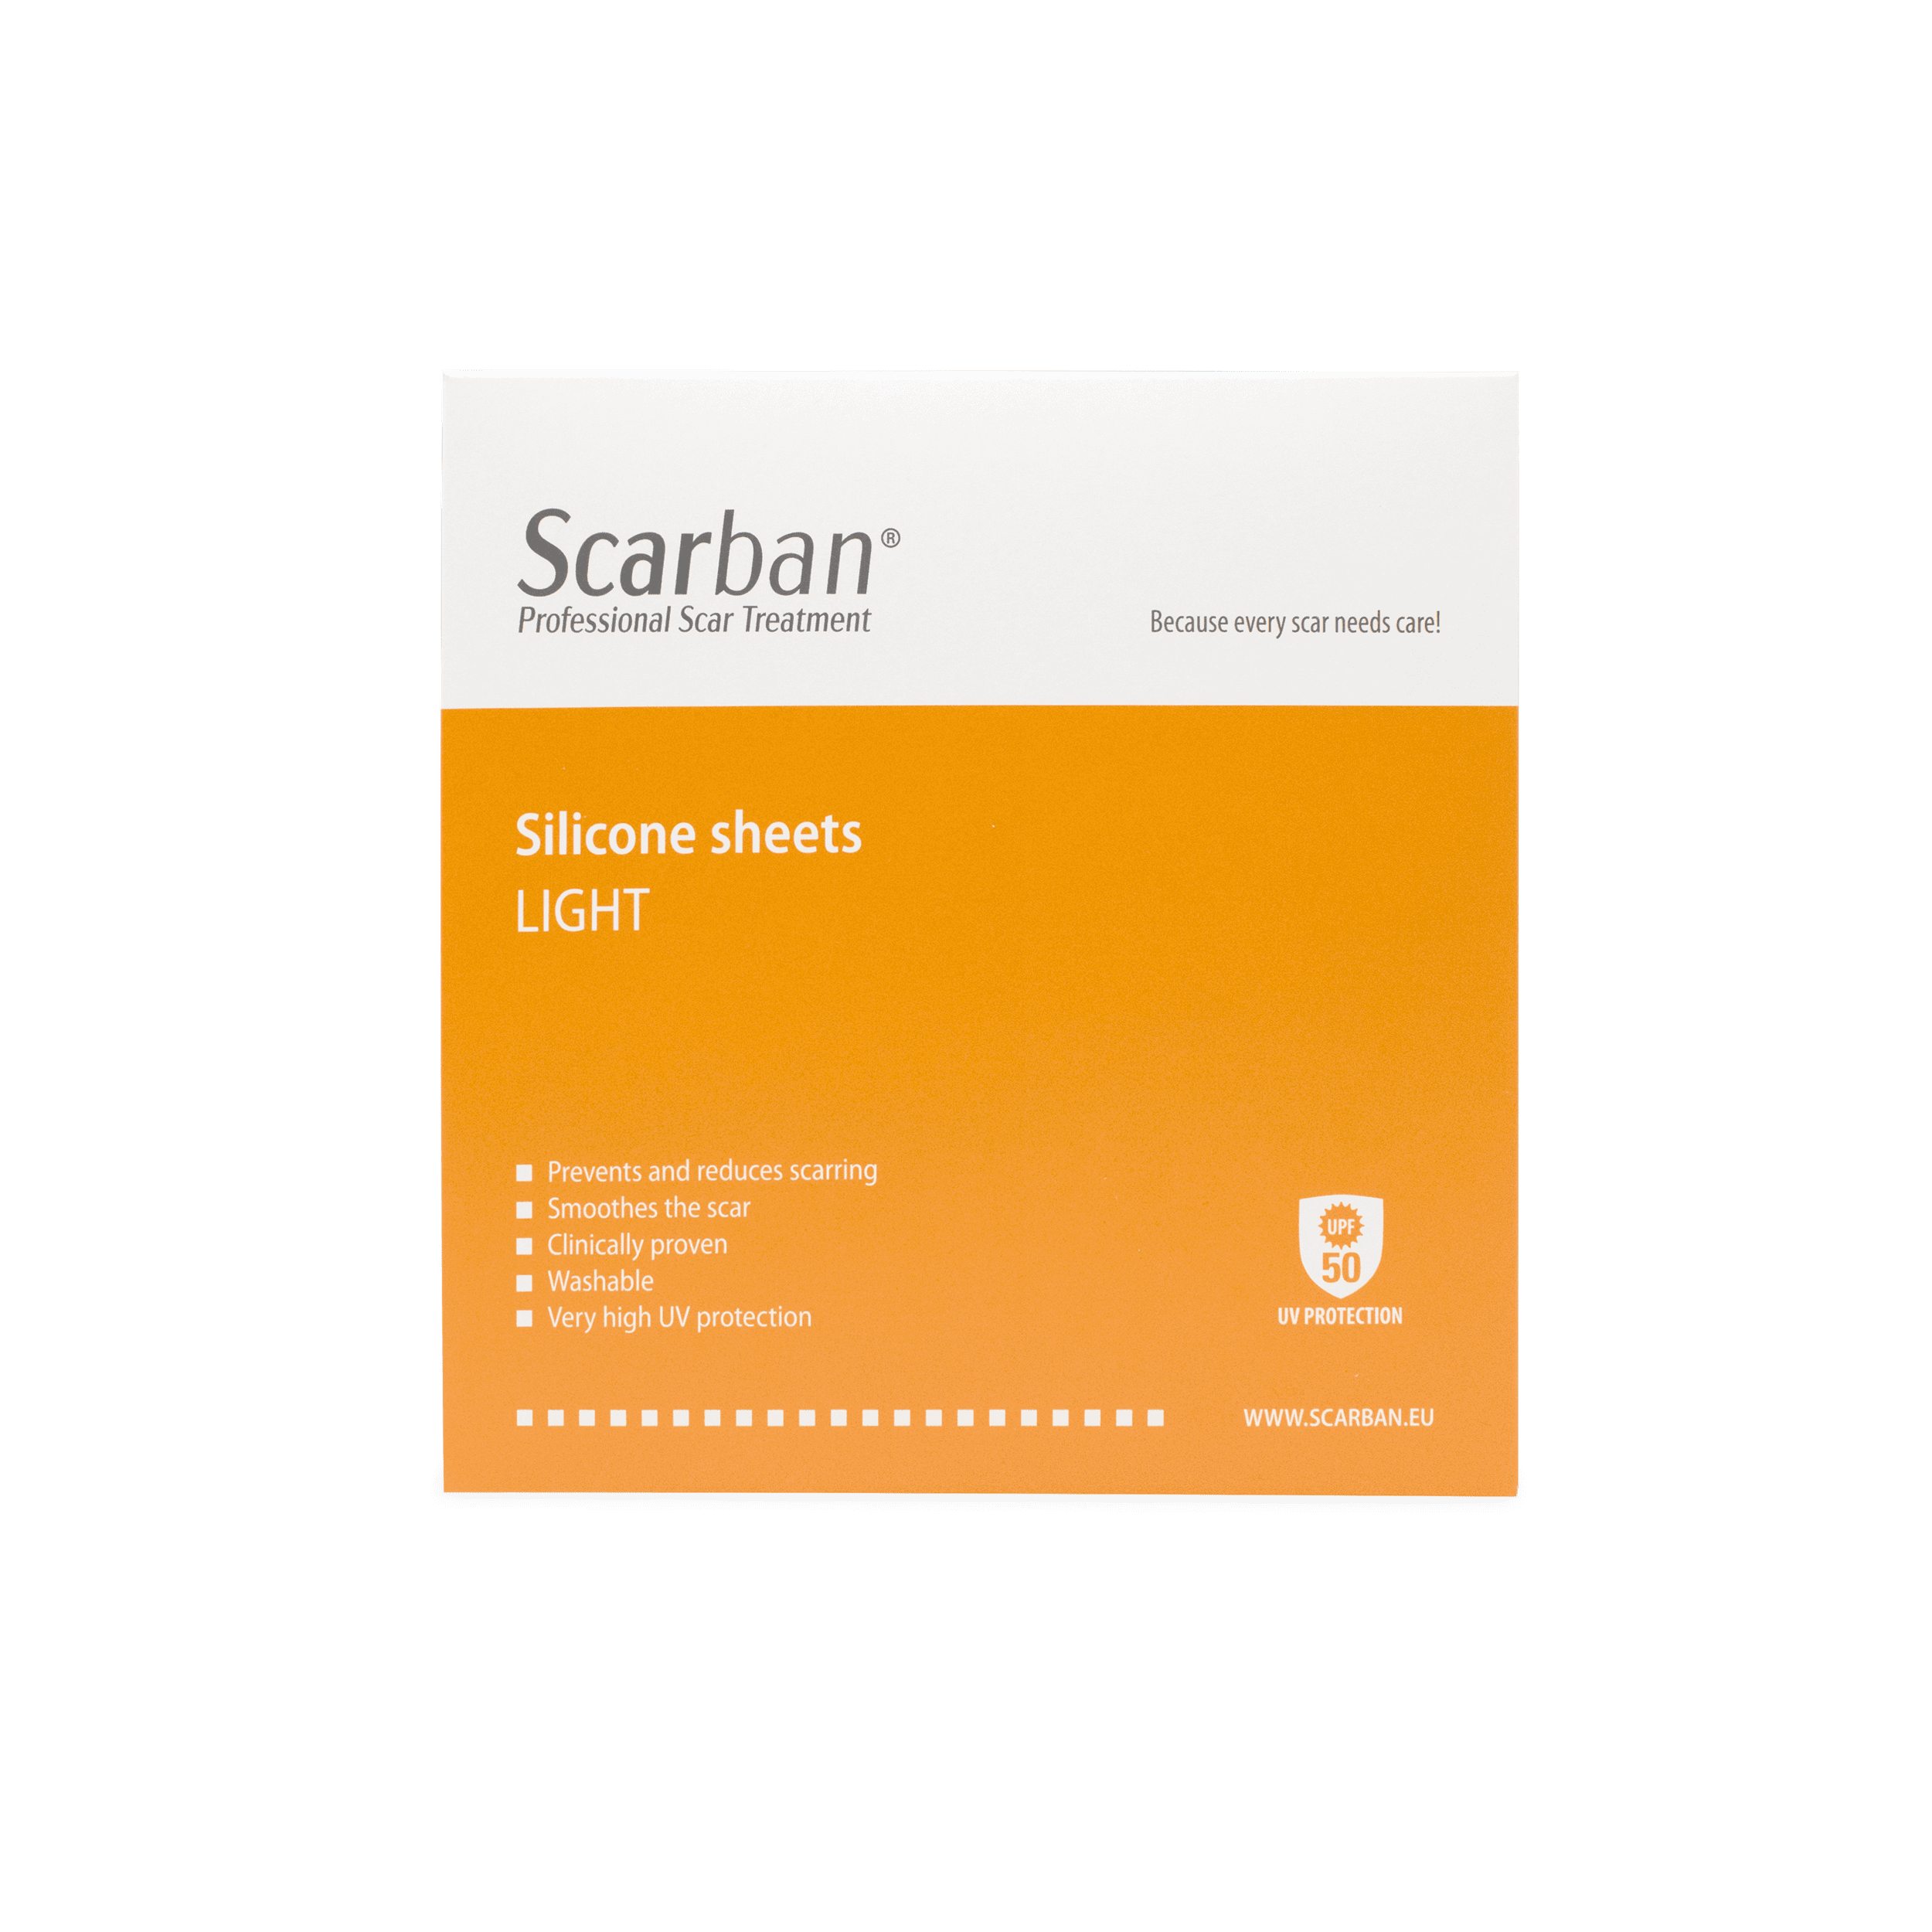 Scarban: Light Silicone Sheets – OneUp Healthcare